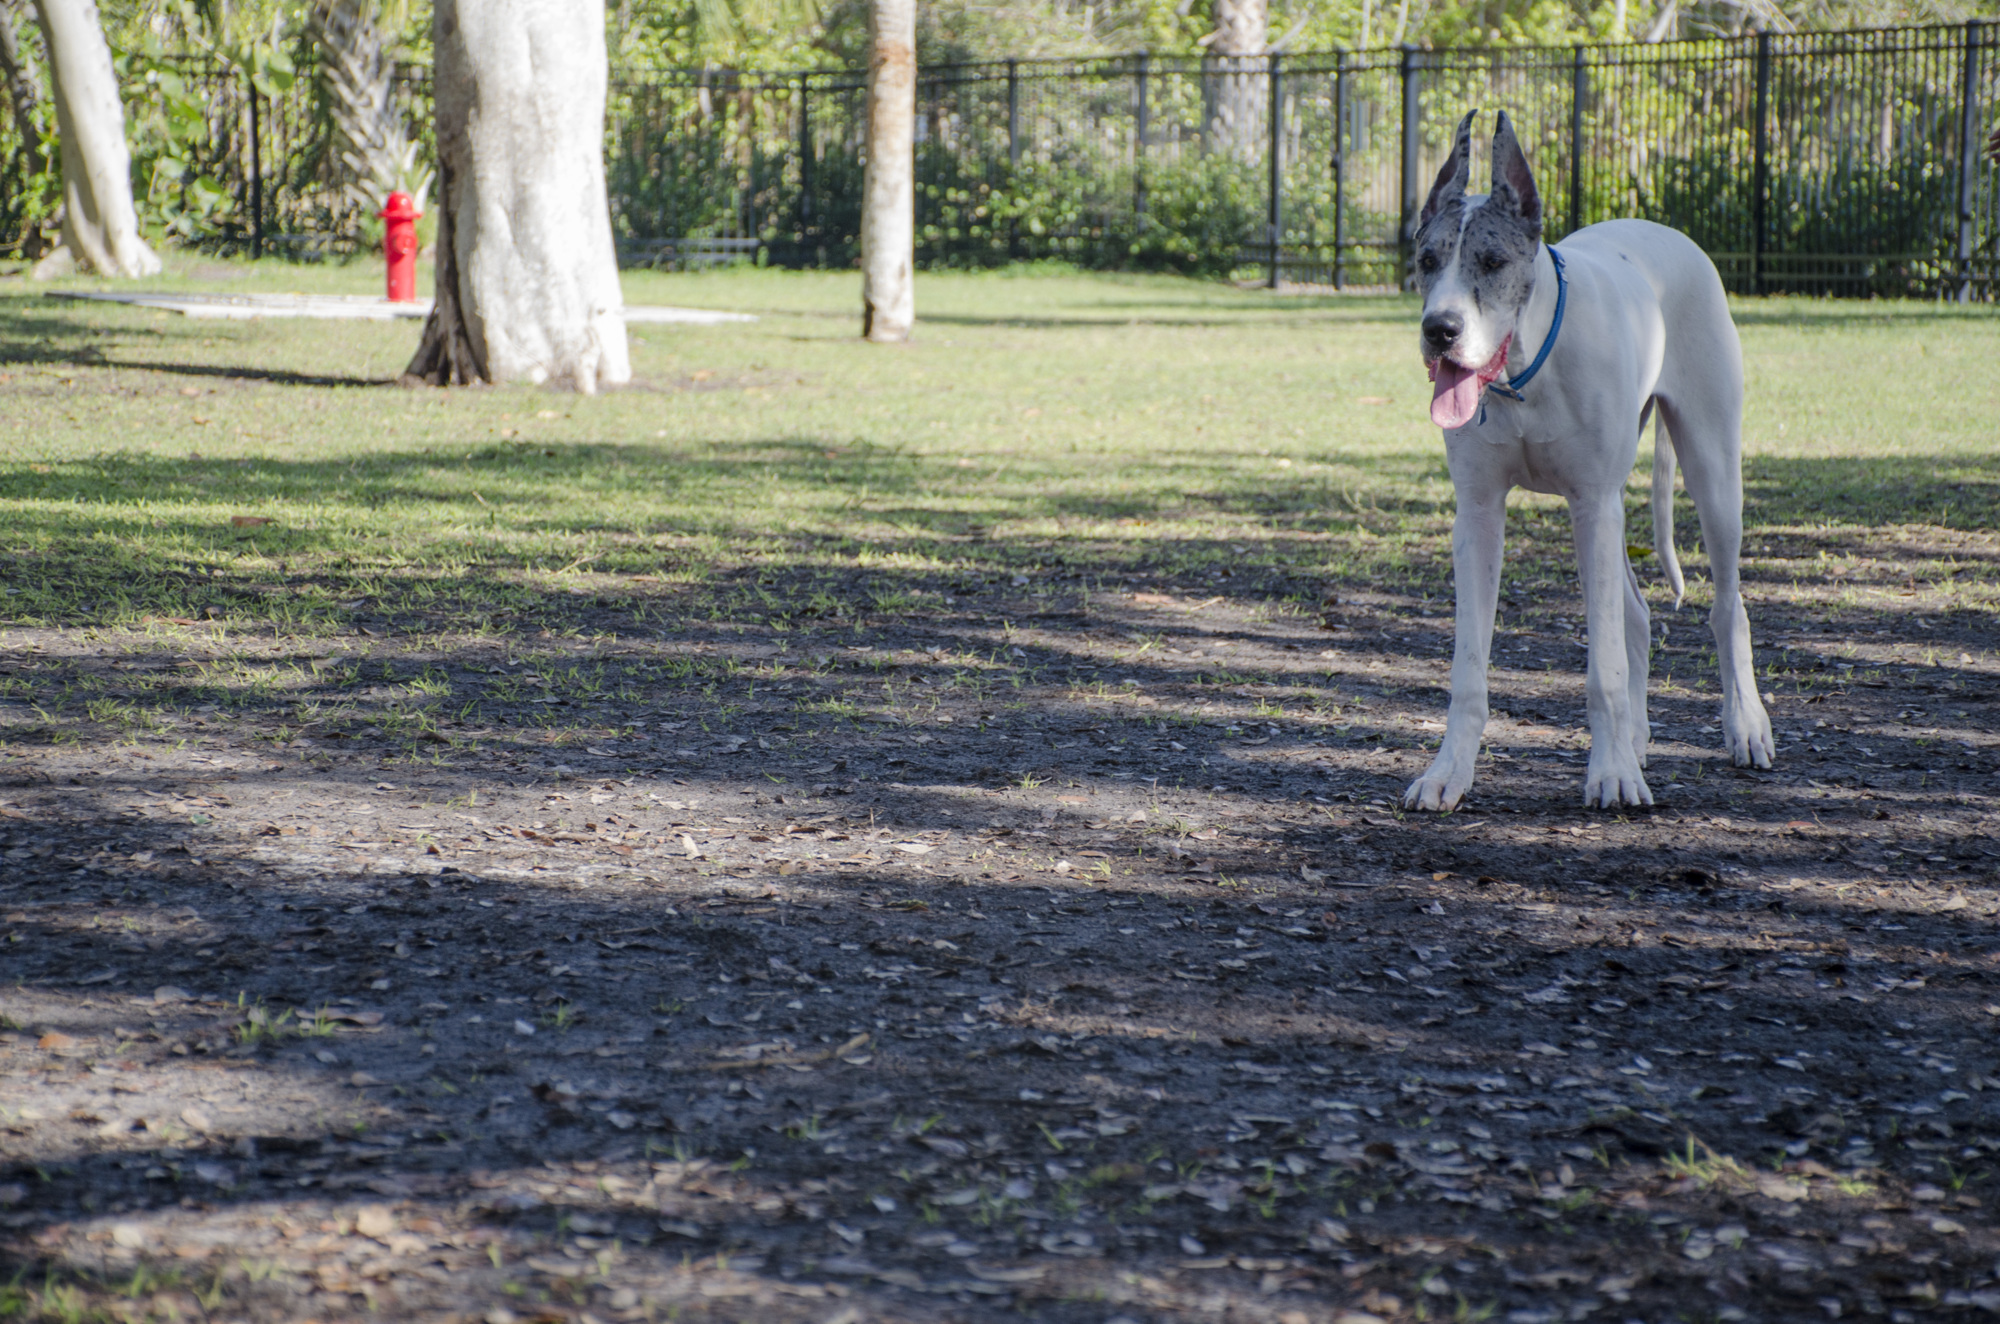 Emma, a two-year-old great dane, tears up grass when she runs around Bayfront Park dog park.